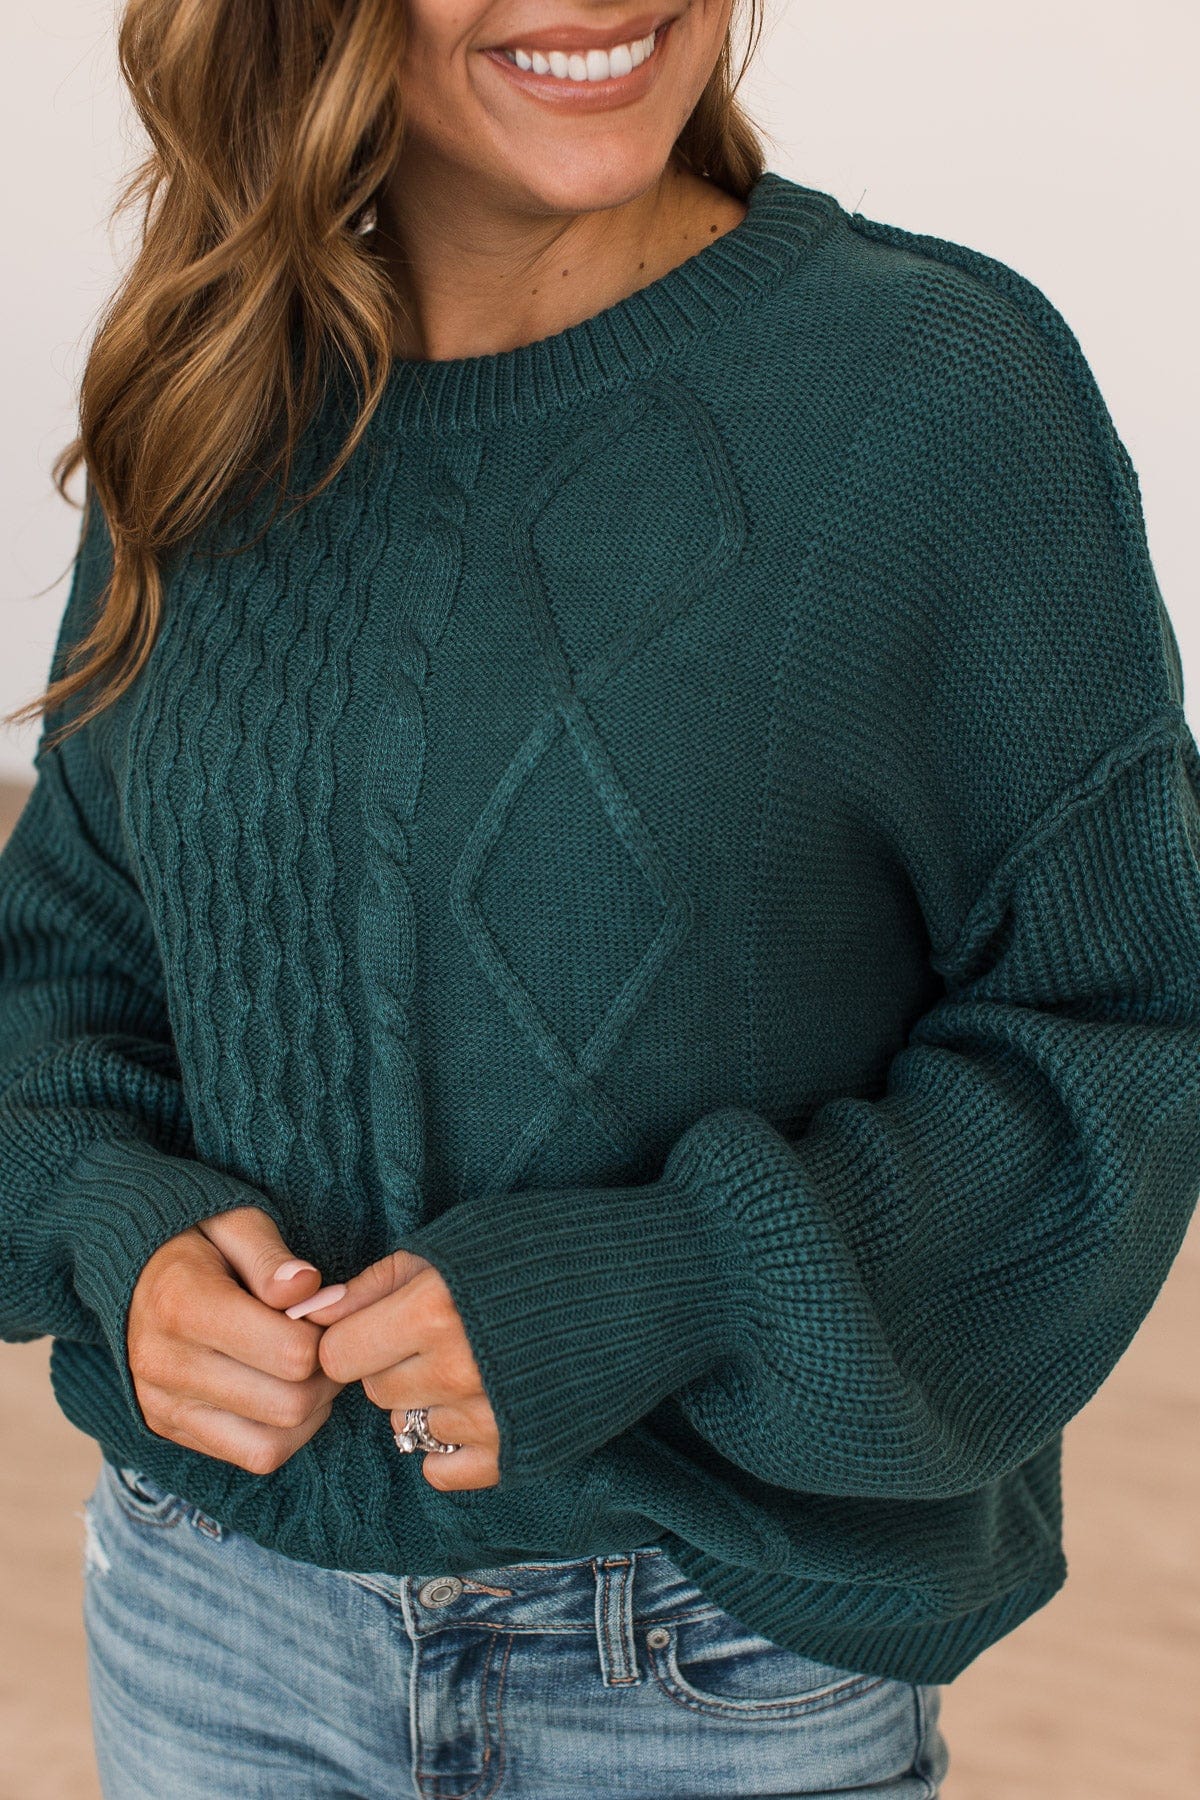 Teal Knit Sweater